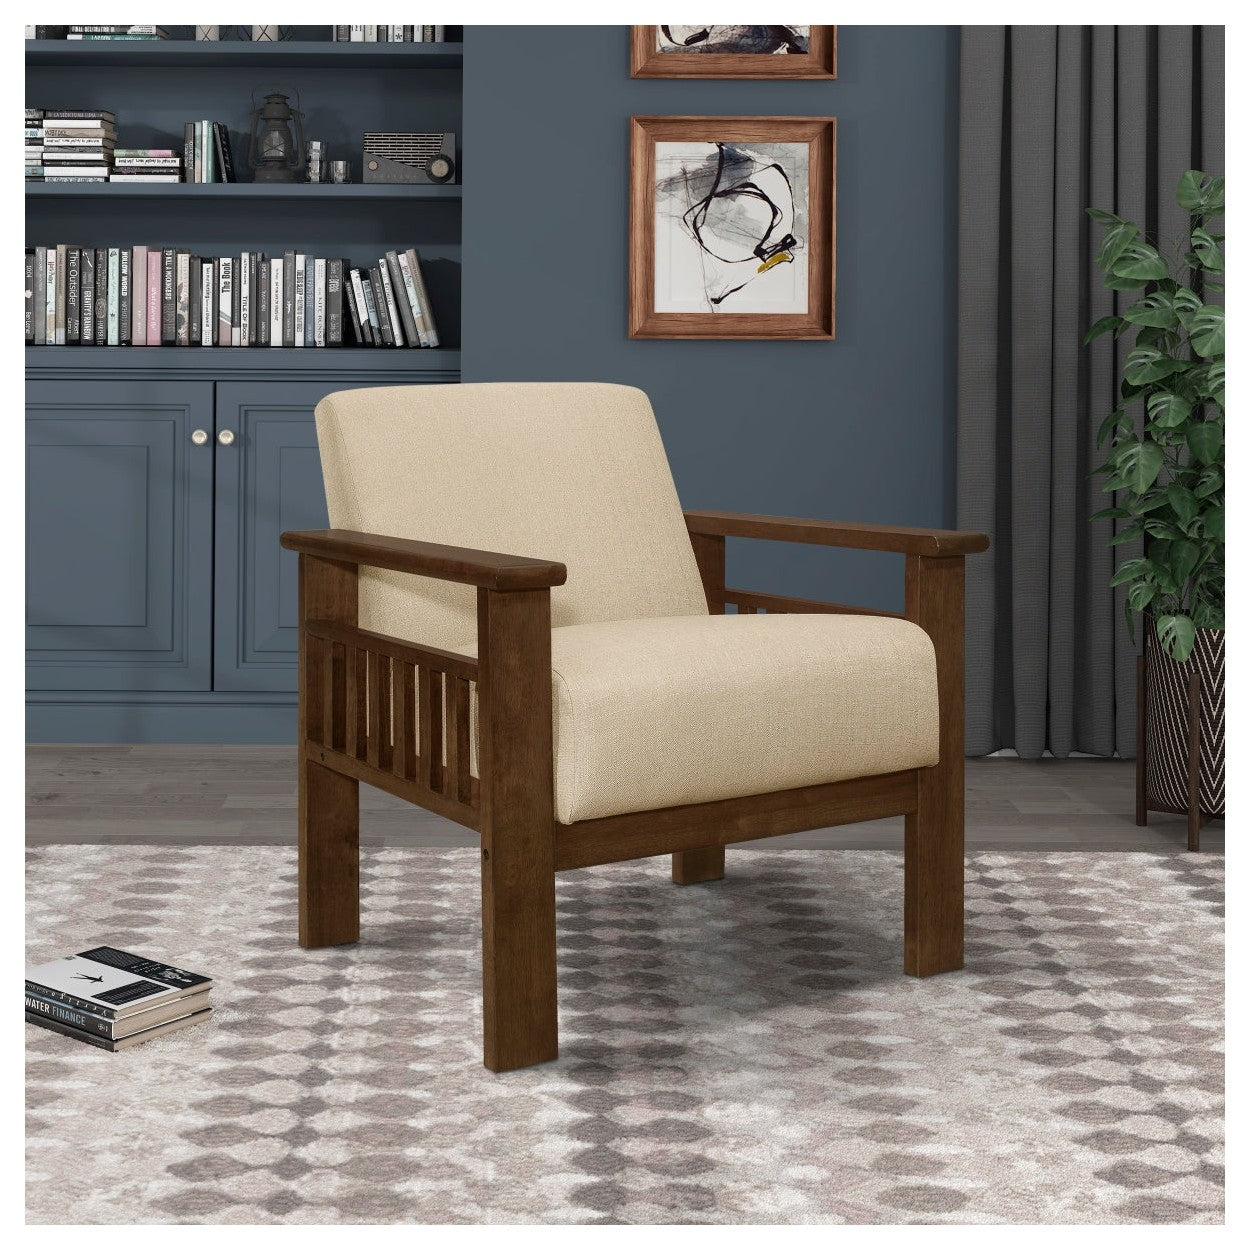 Accent chair with Storage Arms 1048BR-1